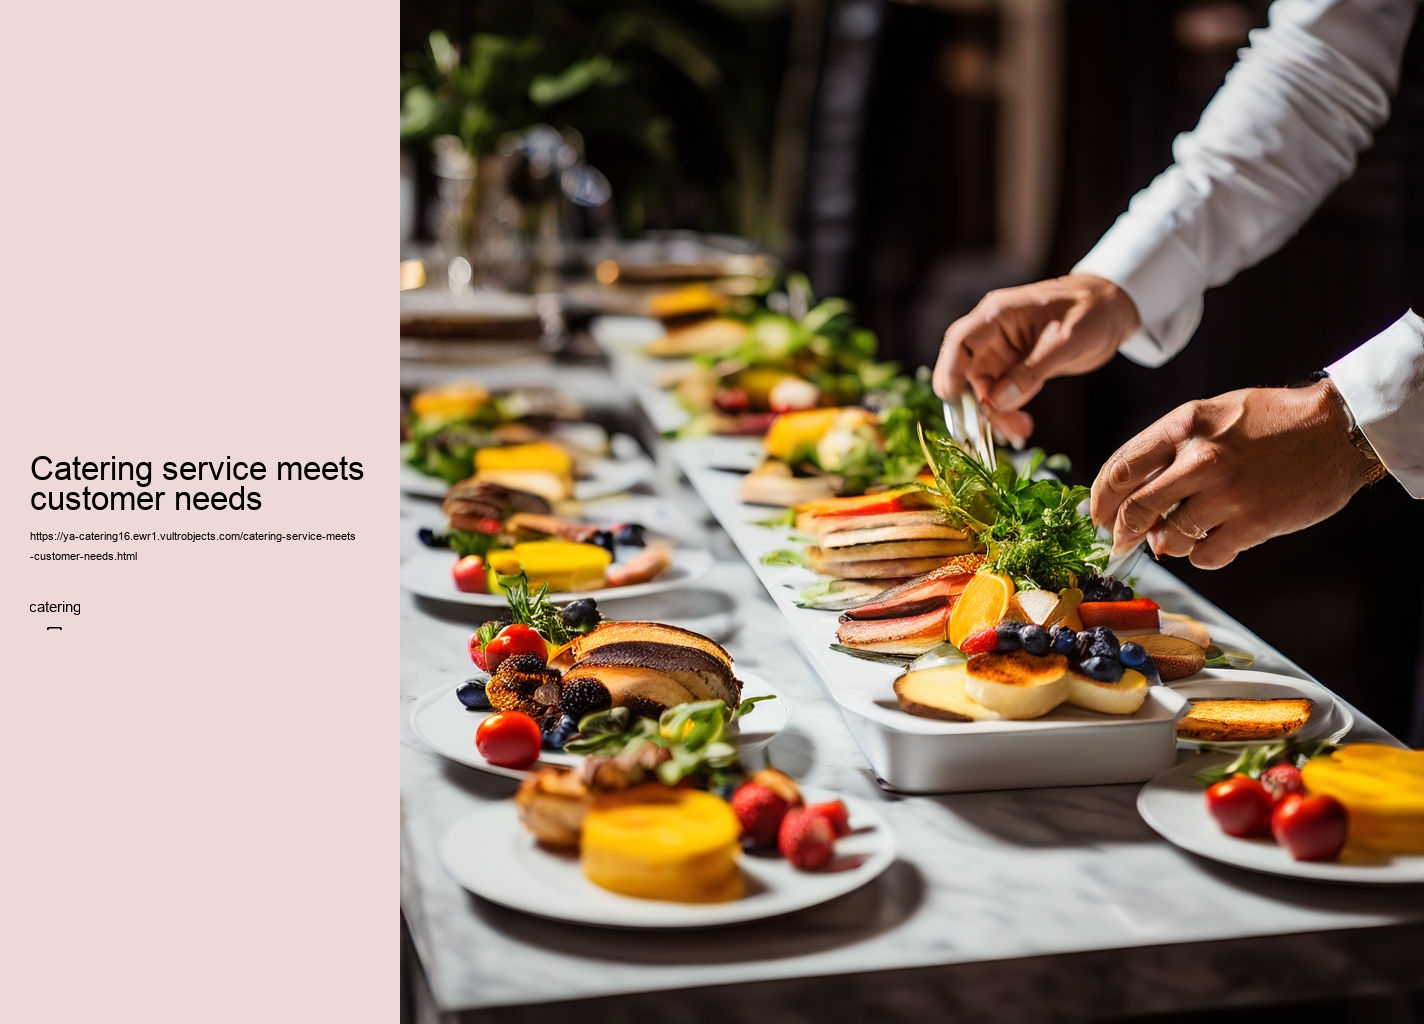 Catering service meets customer needs